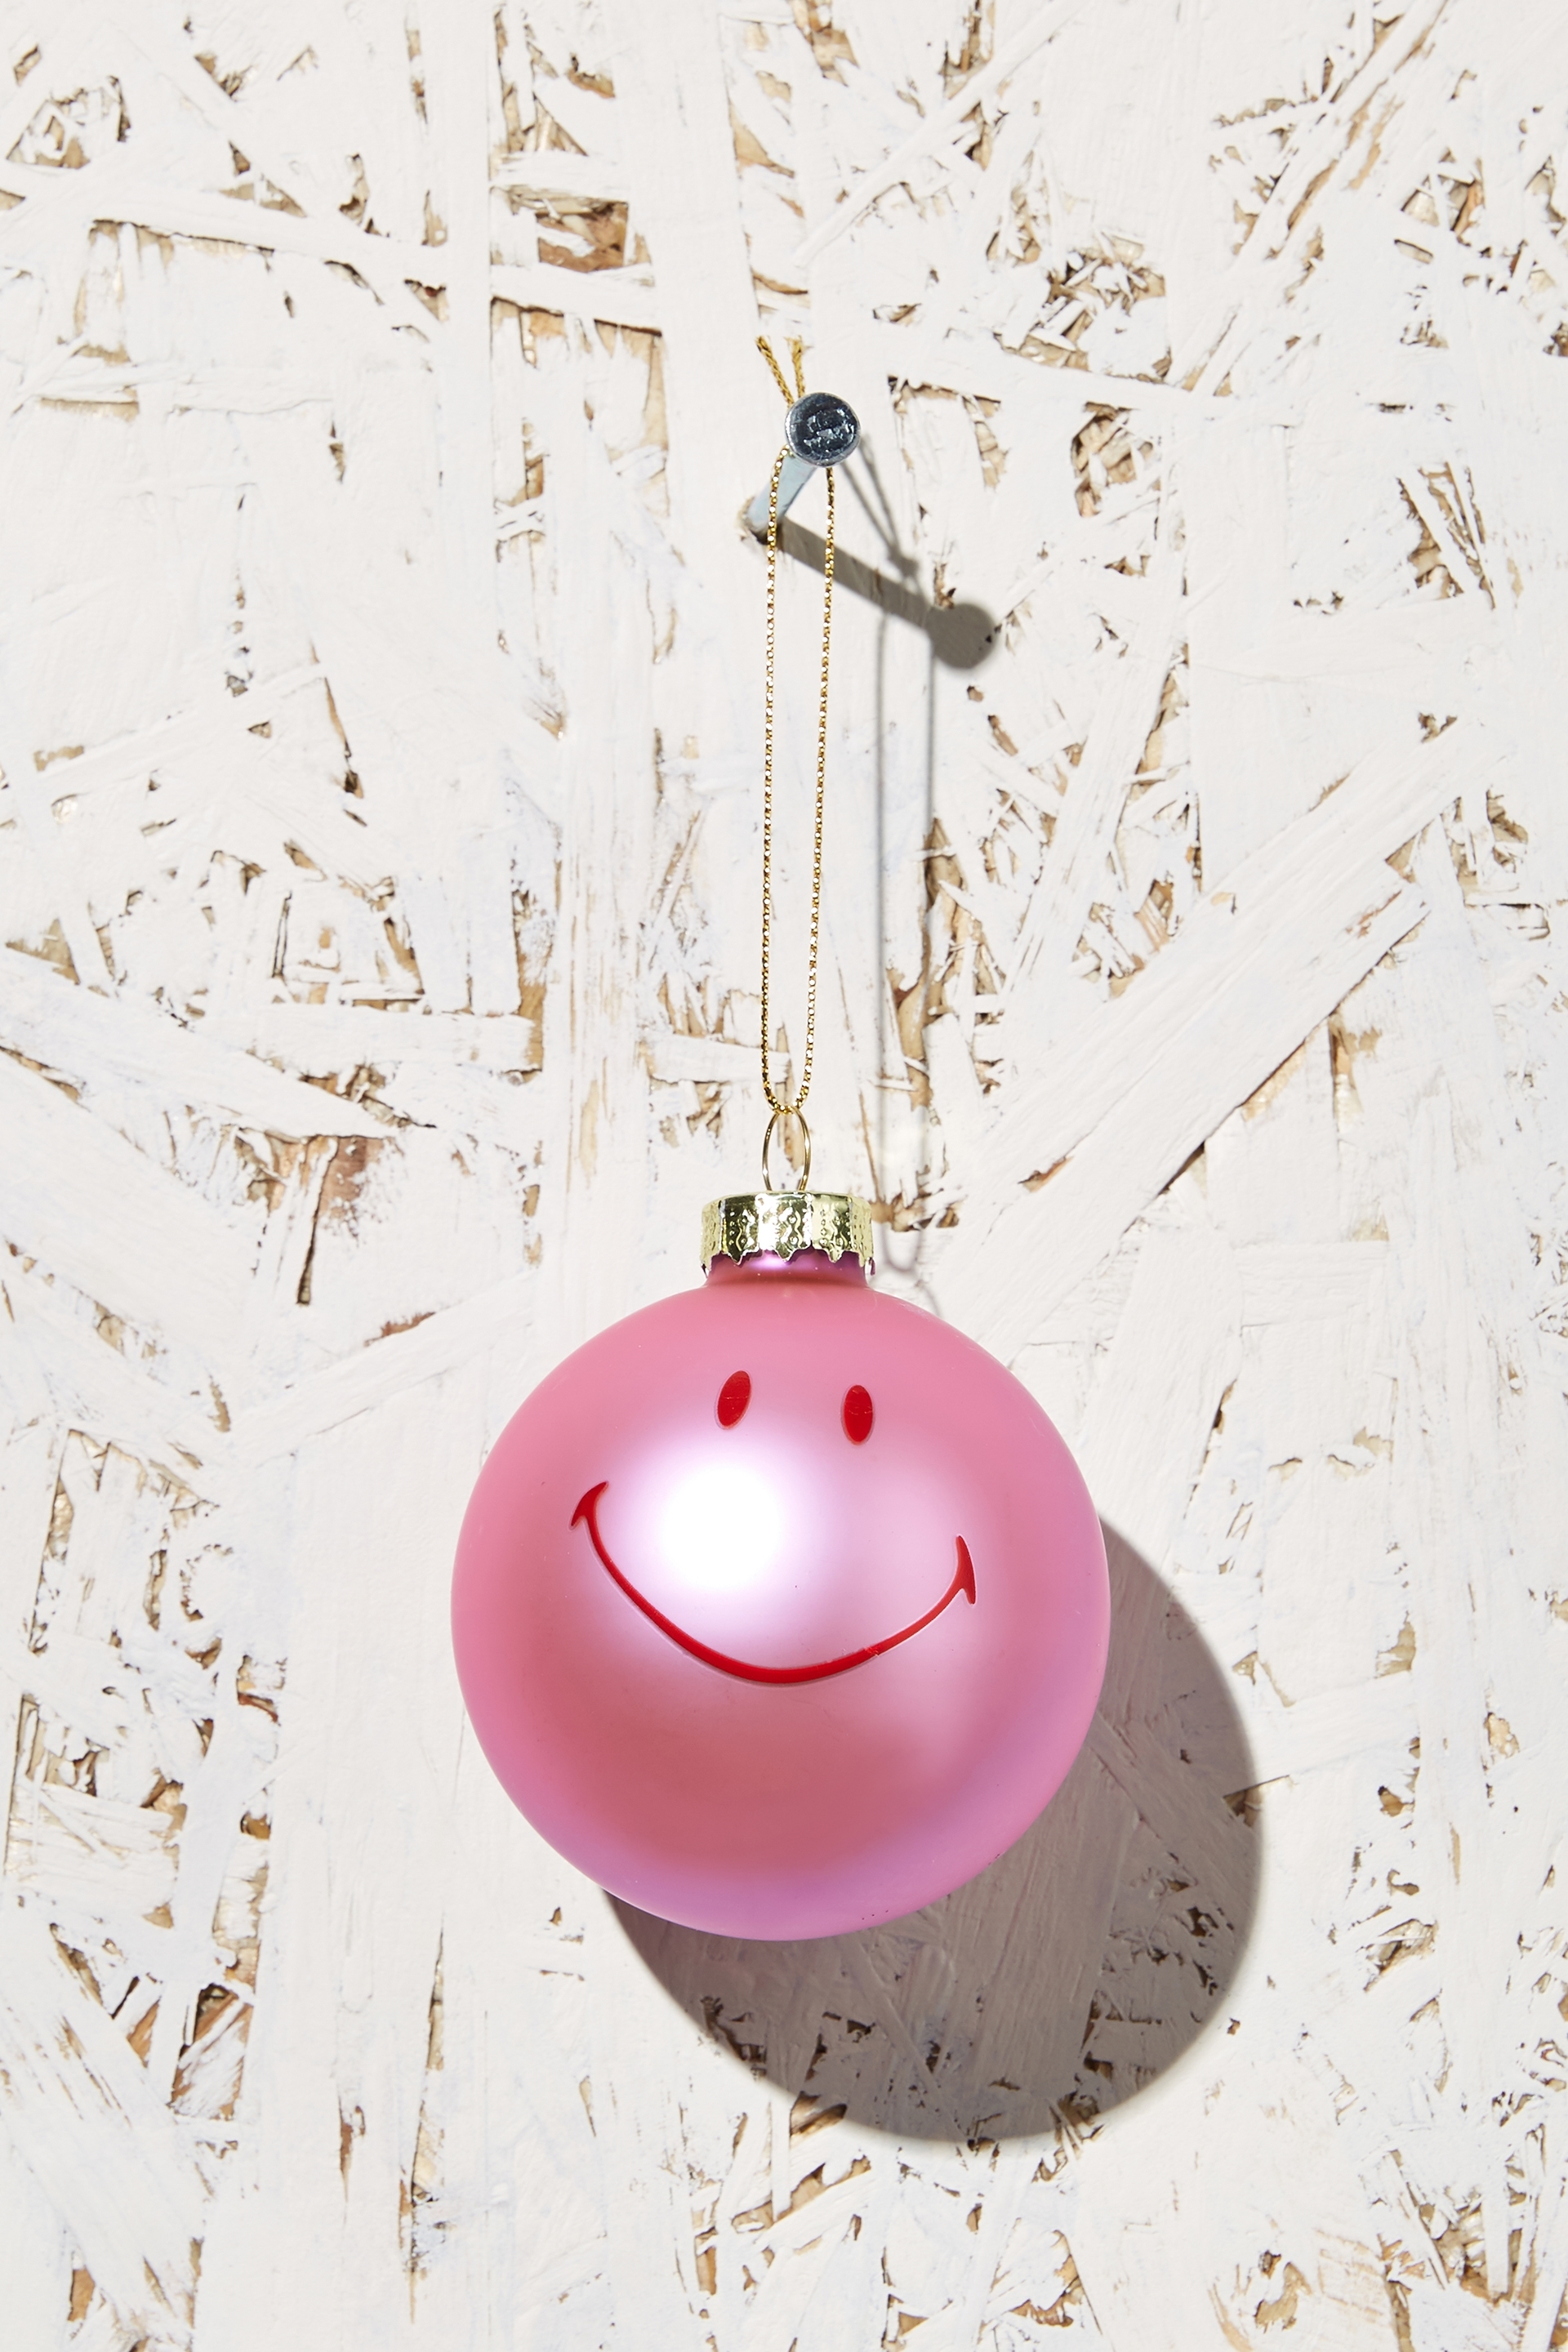 Typo - Small Glass Christmas Ornament - Lcn smi smiley pink face